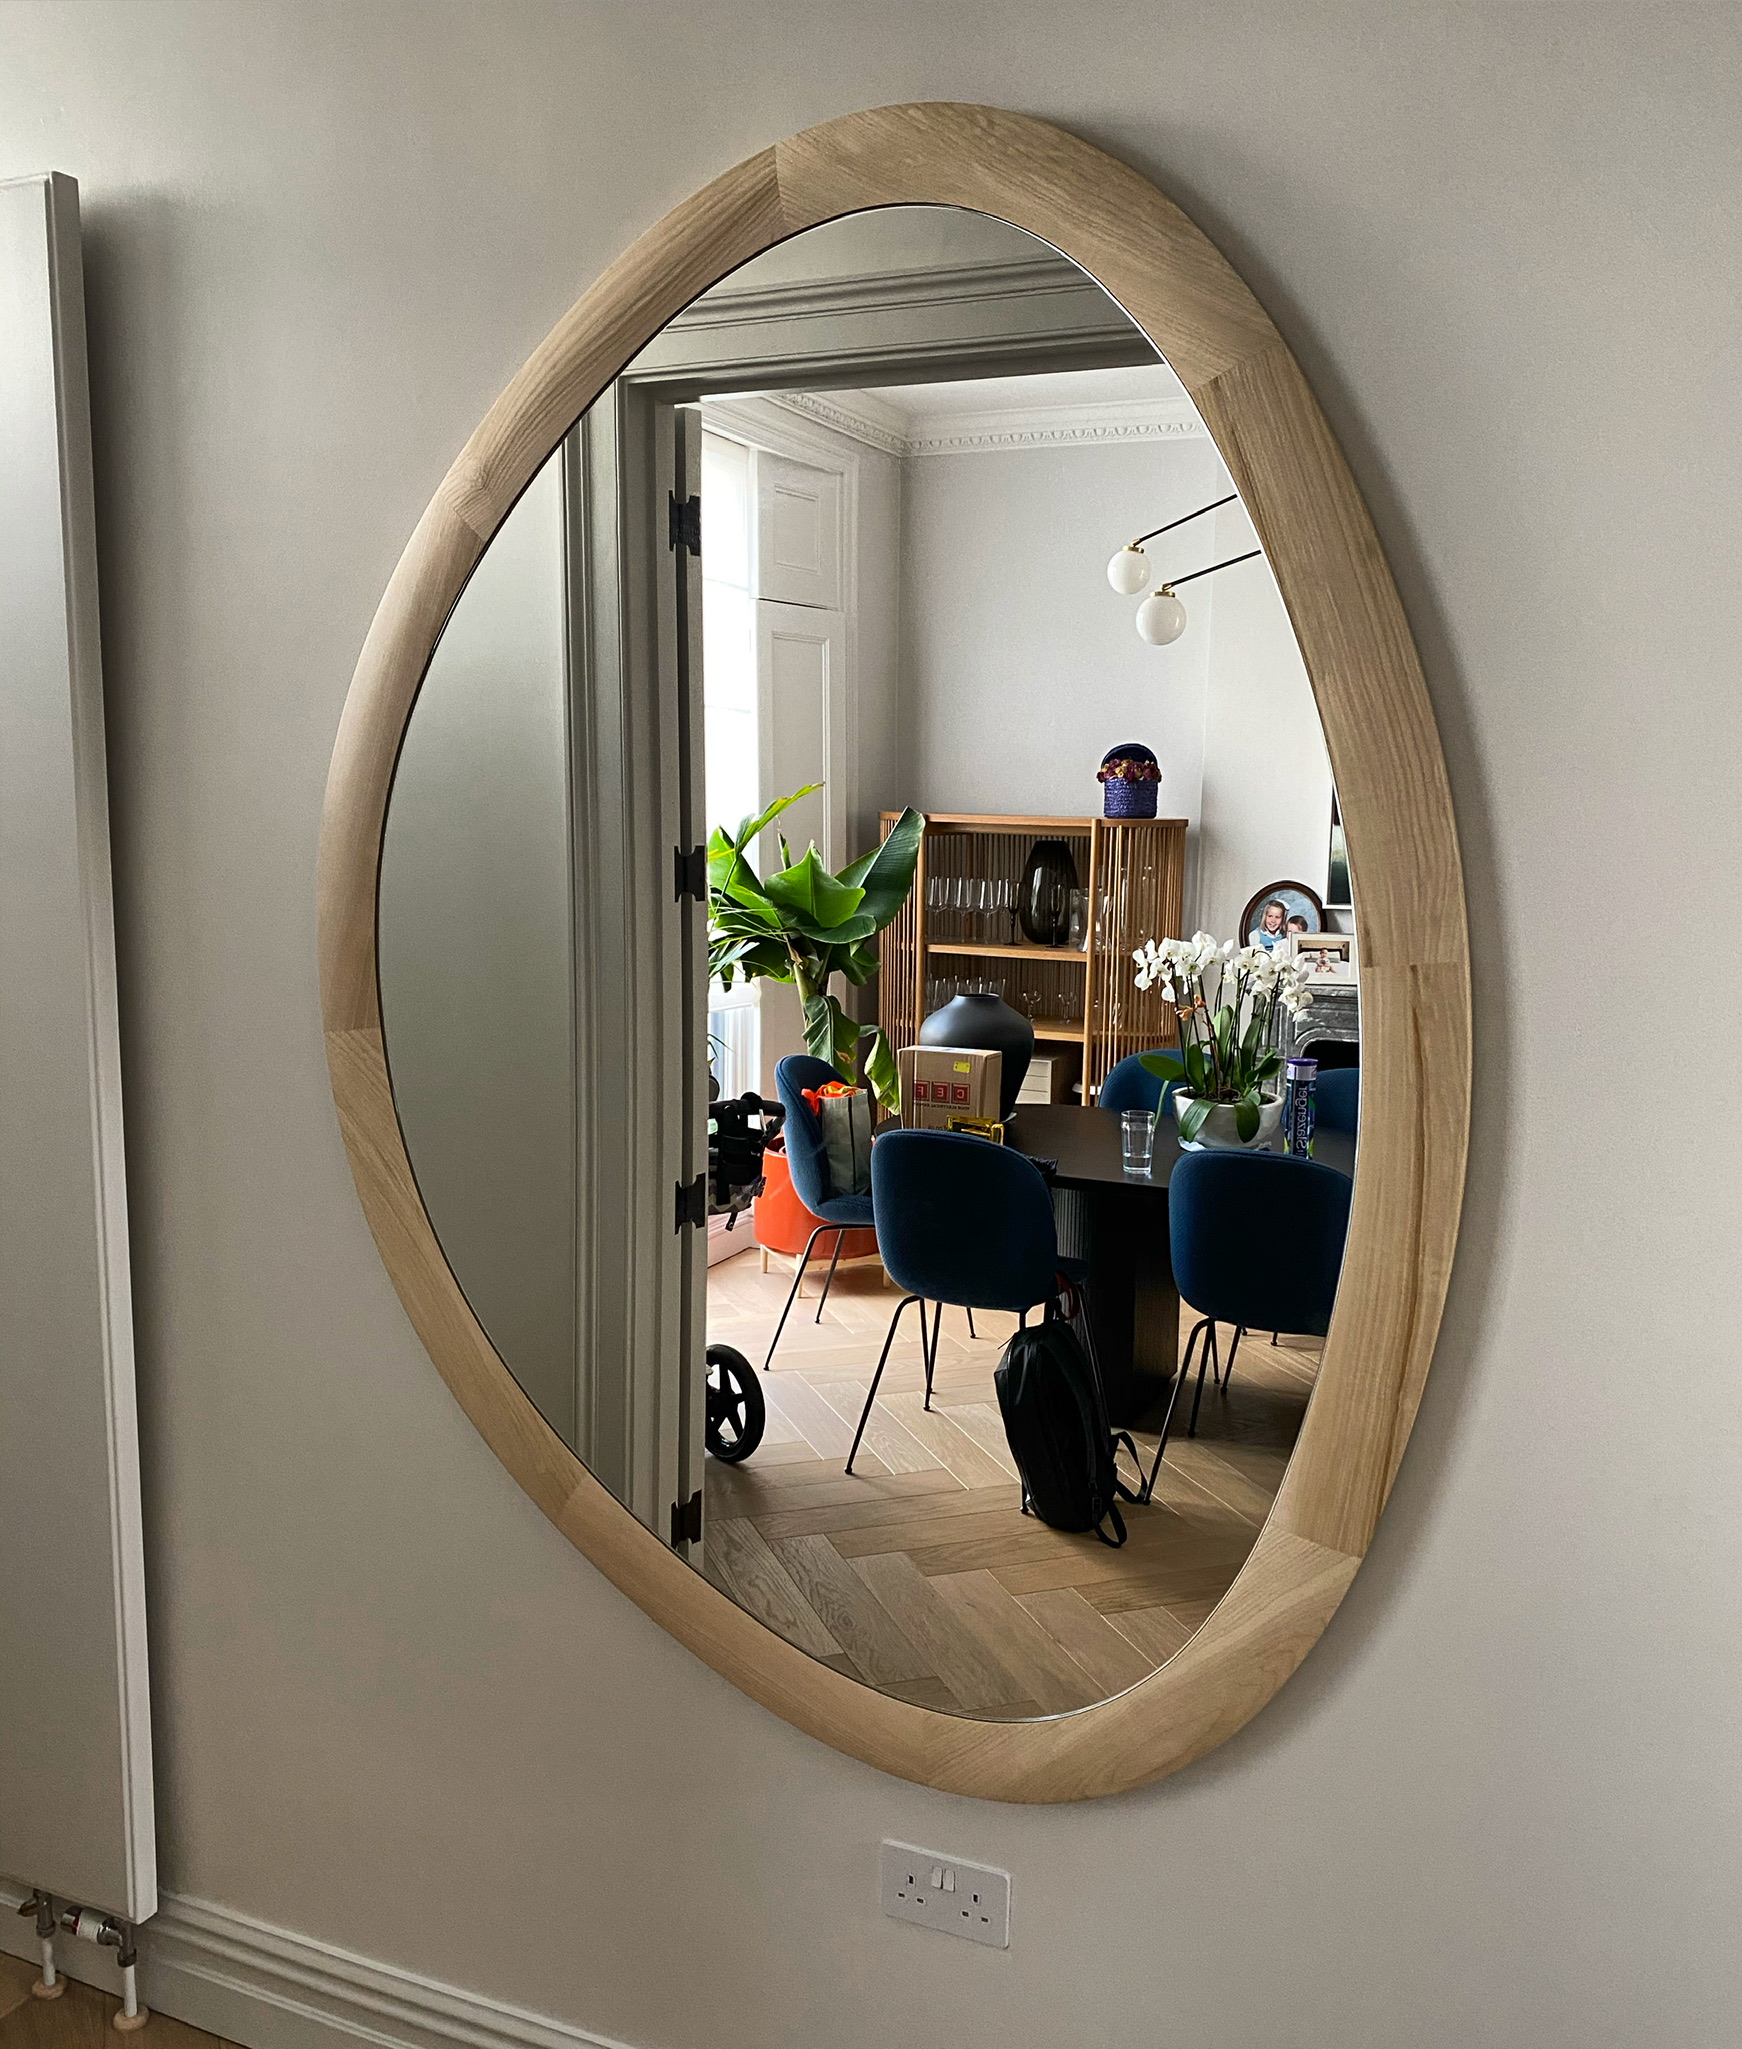 Bespoke mirror fitted for Porada in interior design project in Notting Hill